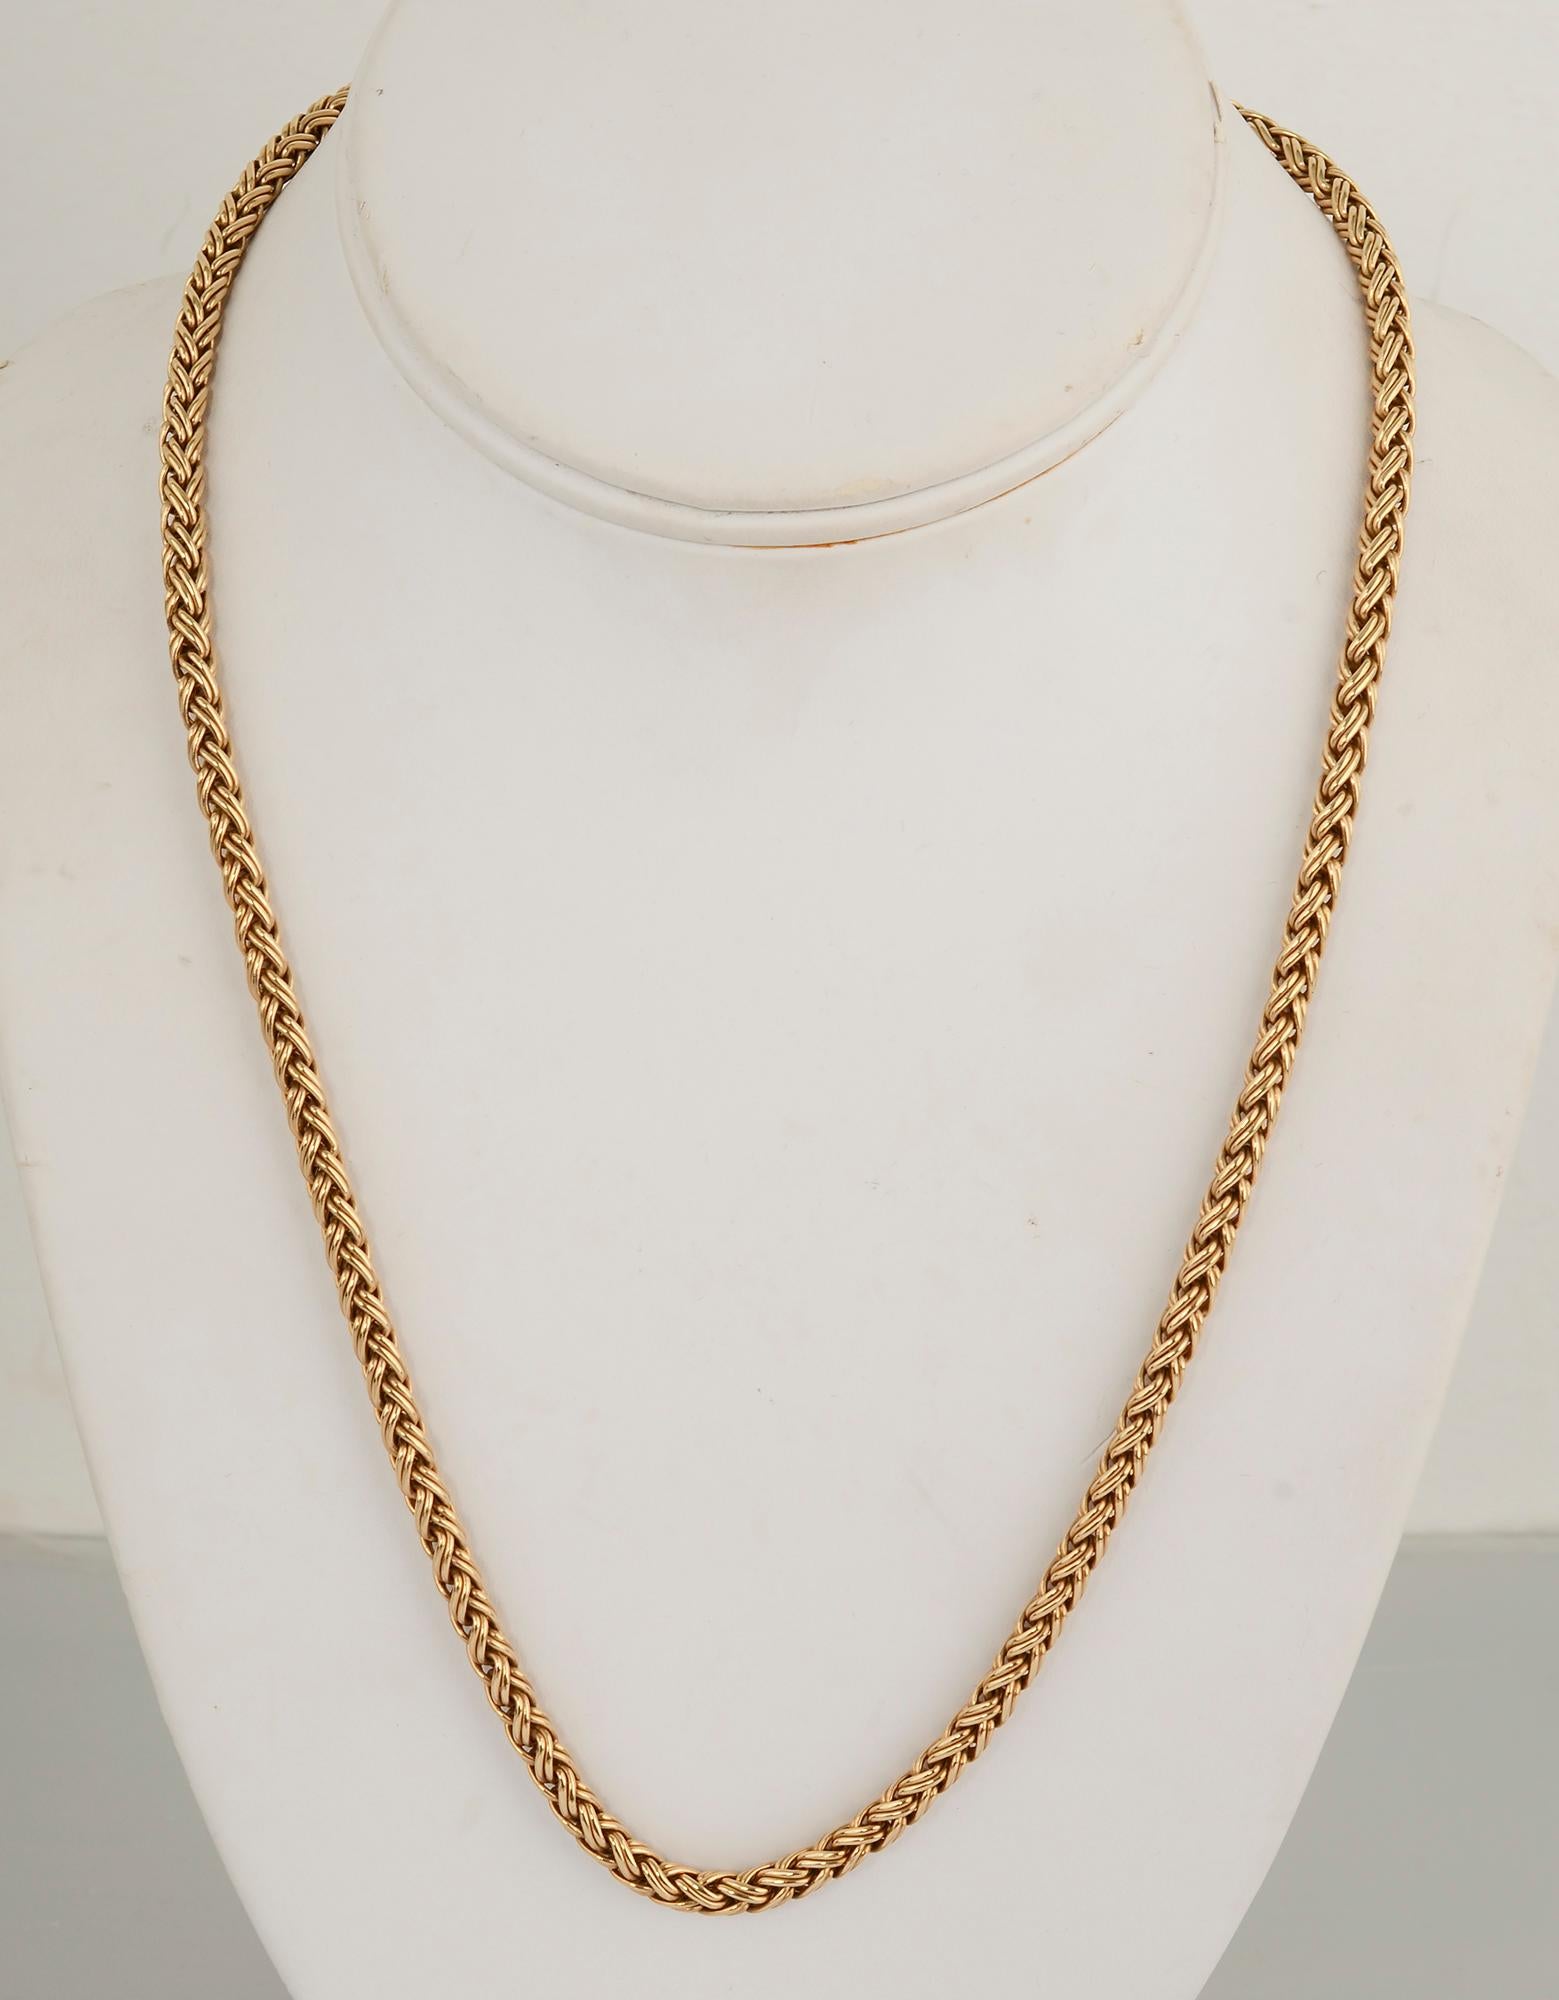 Beautifully woven wheat chain necklace by Tiffany. The necklace is totally in the round as is the tubular shaped push clasp. The chain is 20 1/2 inches long and 3/8 